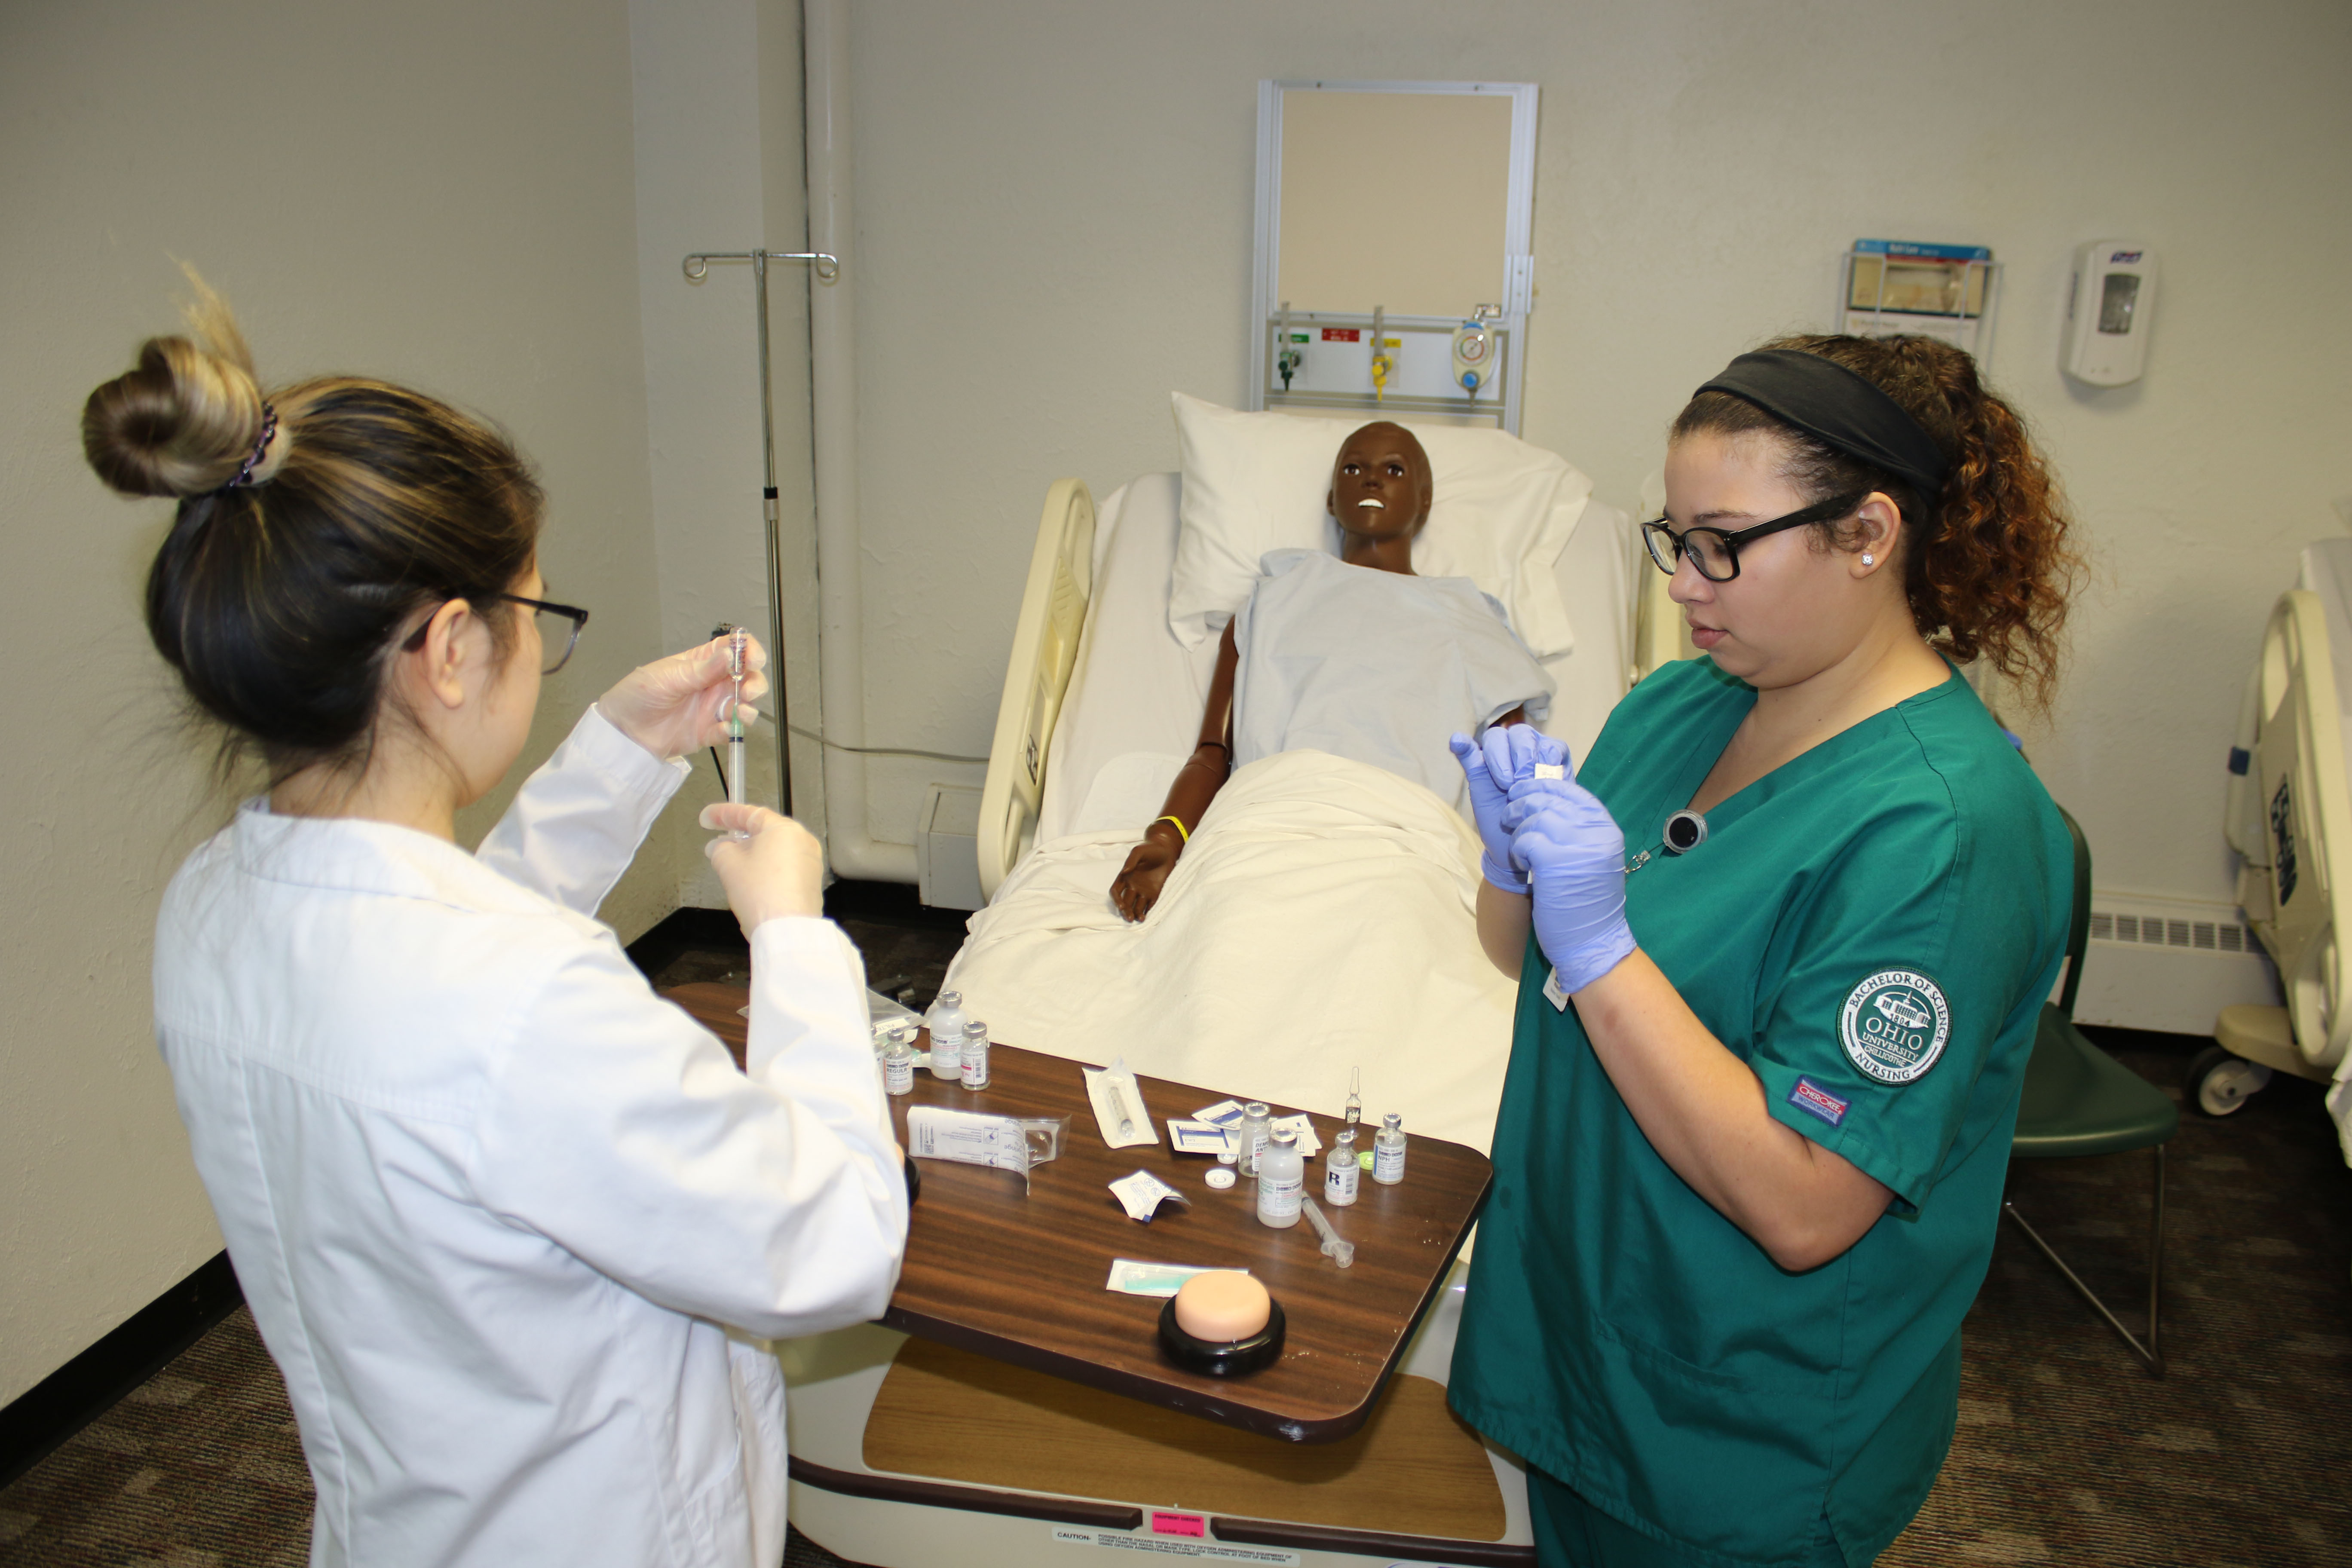 BSN students working in a lab space